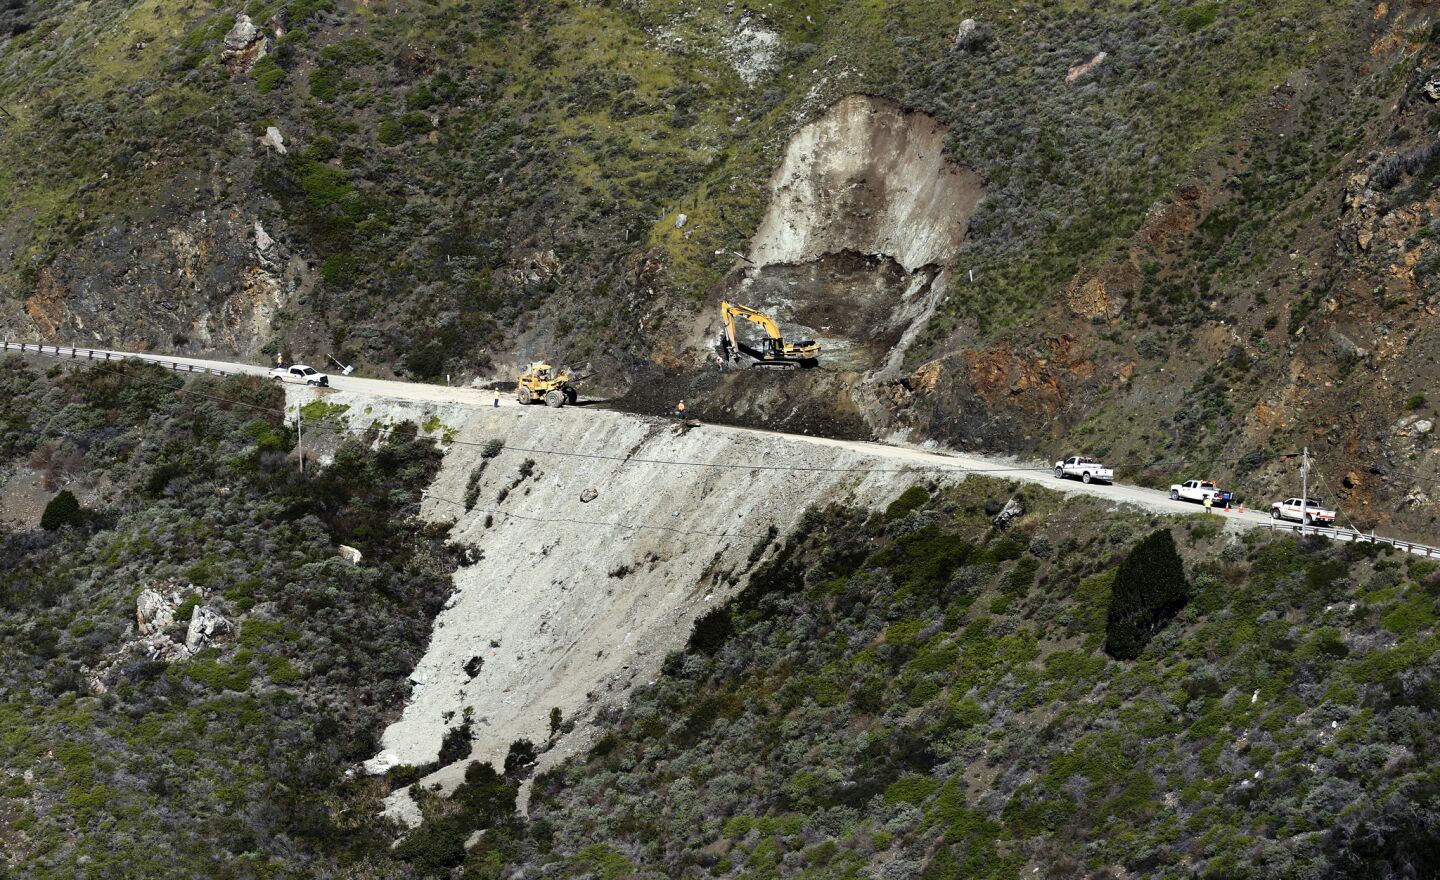 Since mid-February, the southern end of Highway One, just north of Ragged Point, has been struck by a number of landslides, forcing the closure of the road.